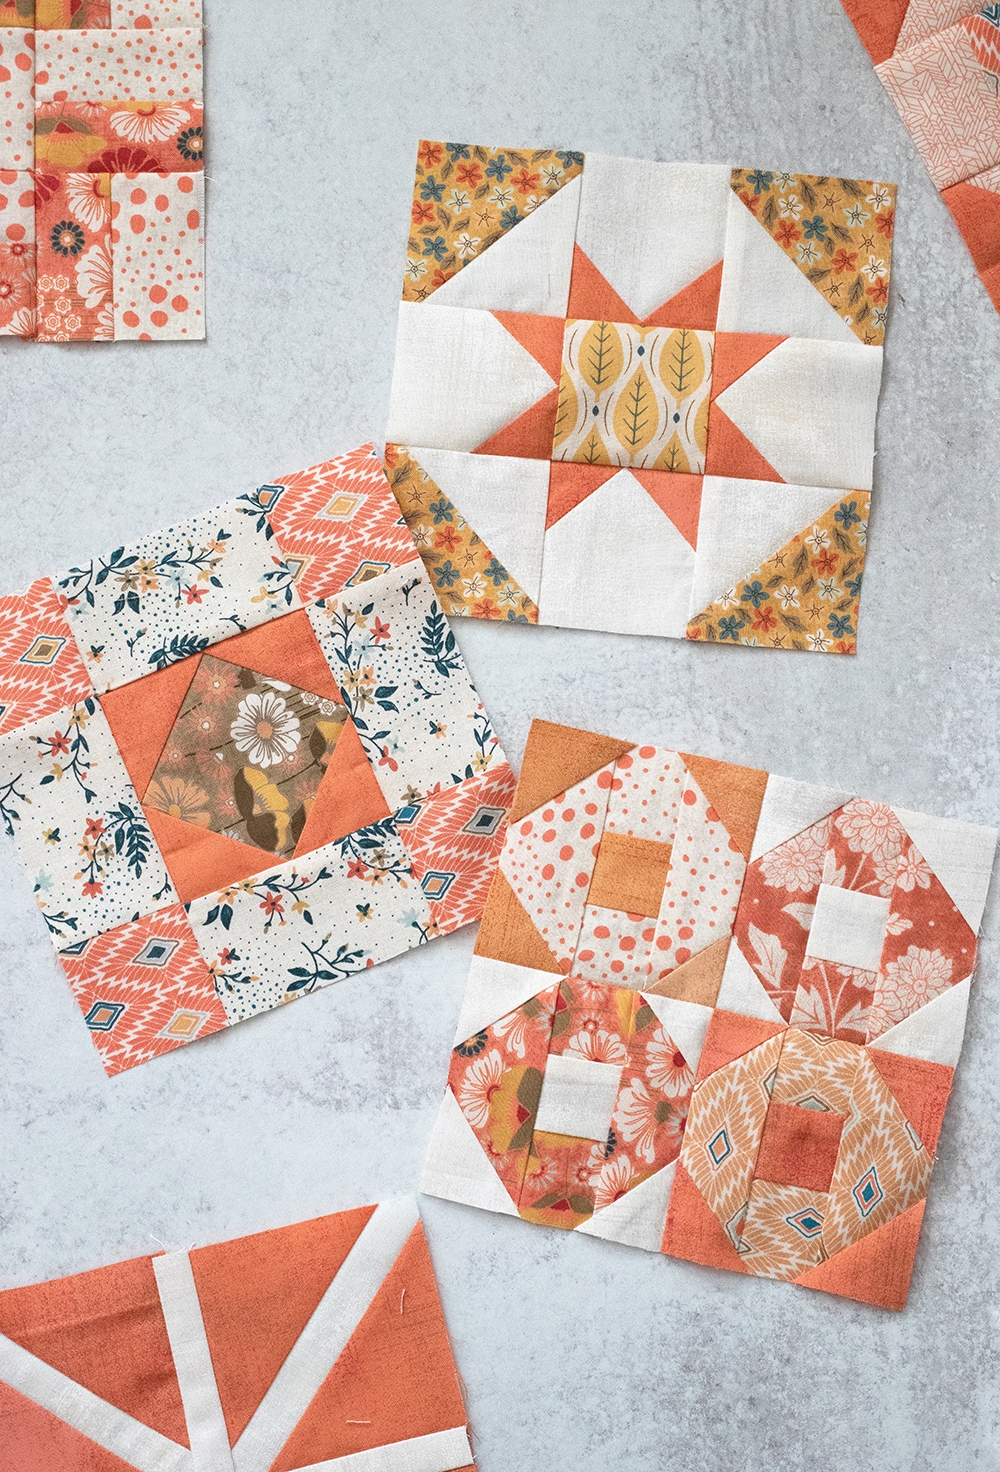 Sampler Spree Sew Along (Week 4). Check out Vanessa's blocks using Cider and Persimmon fabric by BasicGrey + her fall leaf quilt top layout.